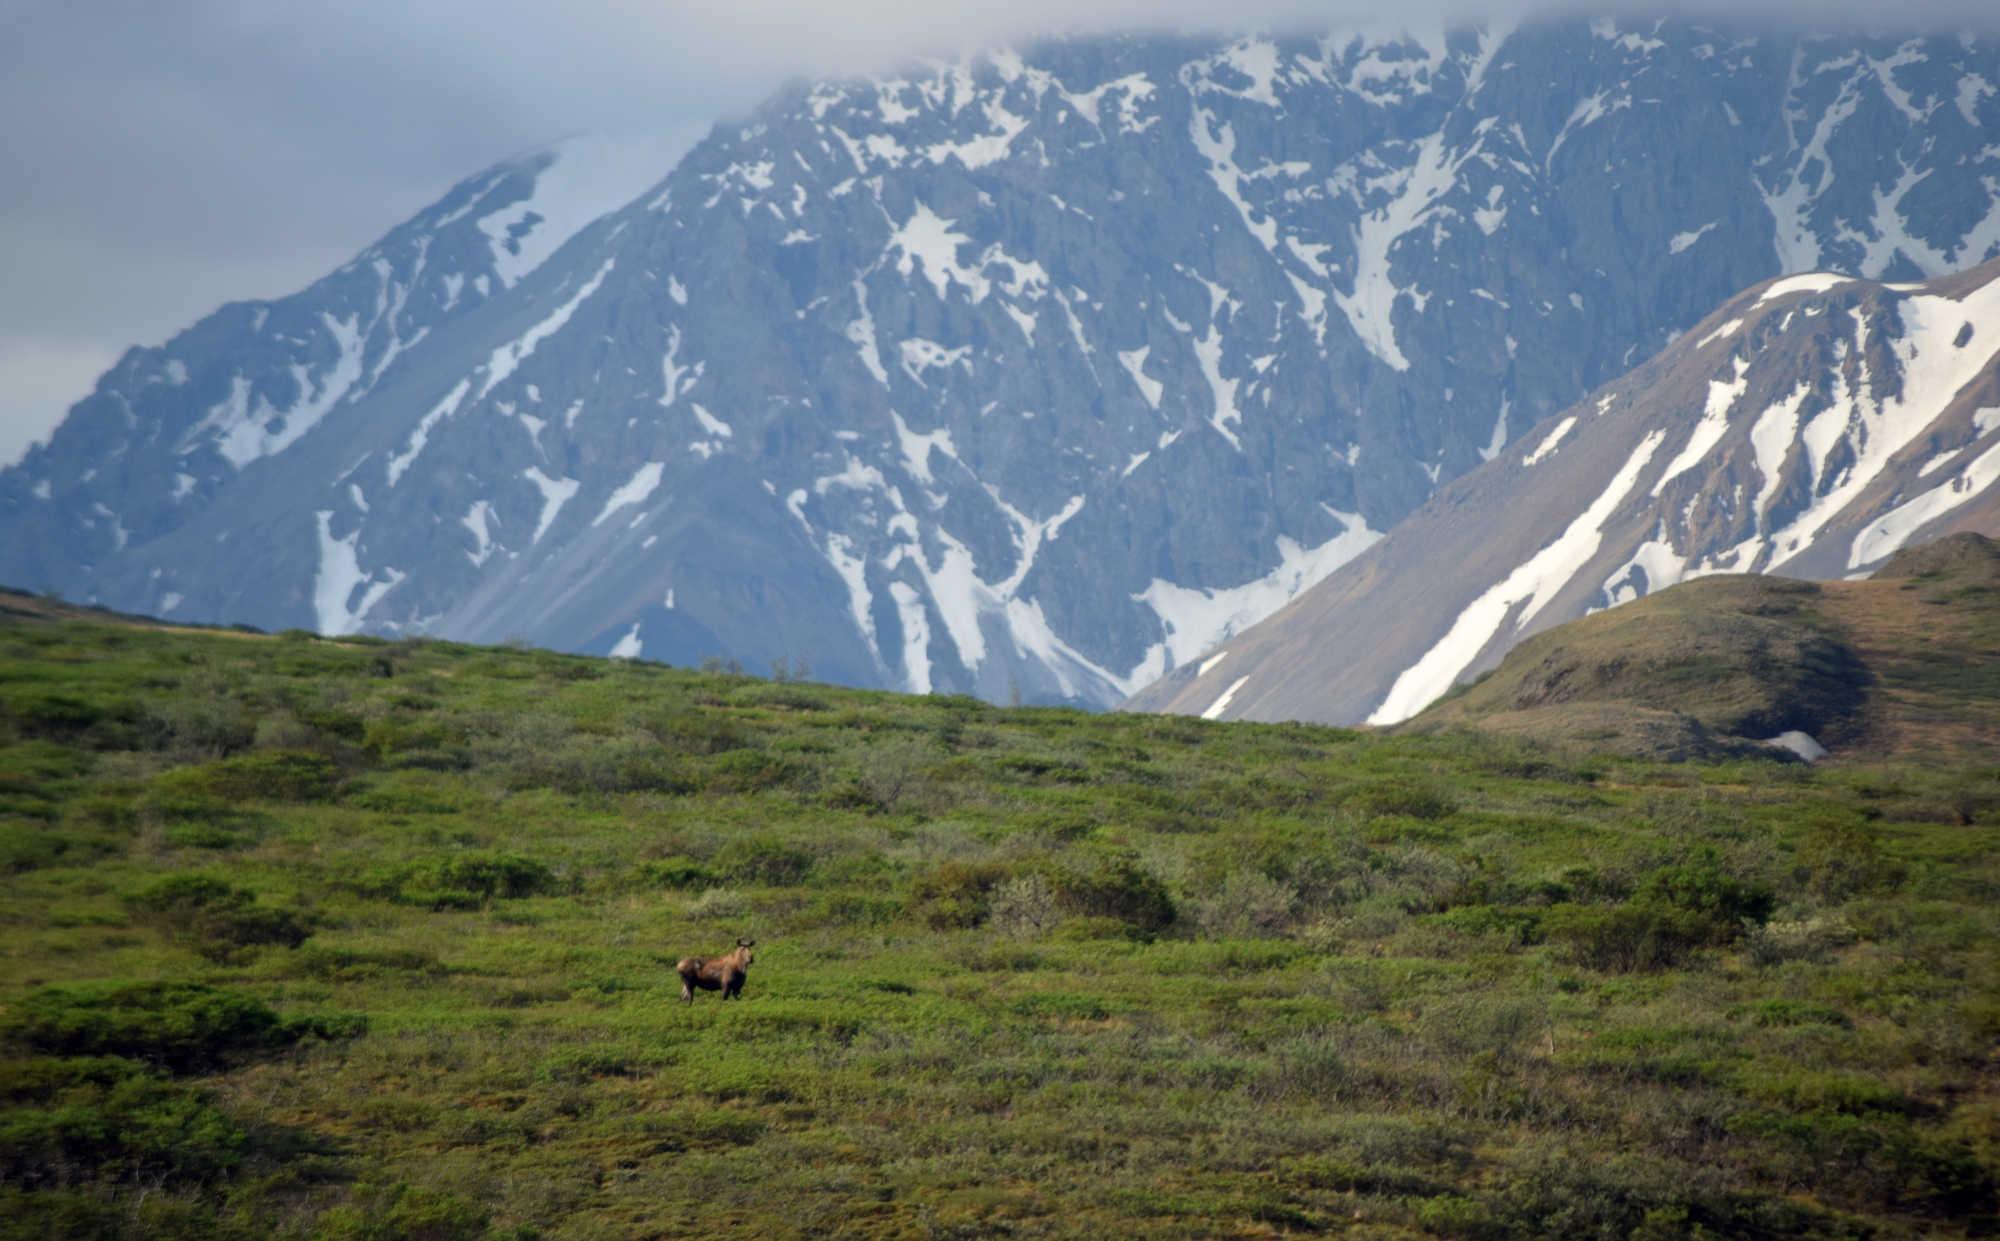 Moose on Hillside with Mountains